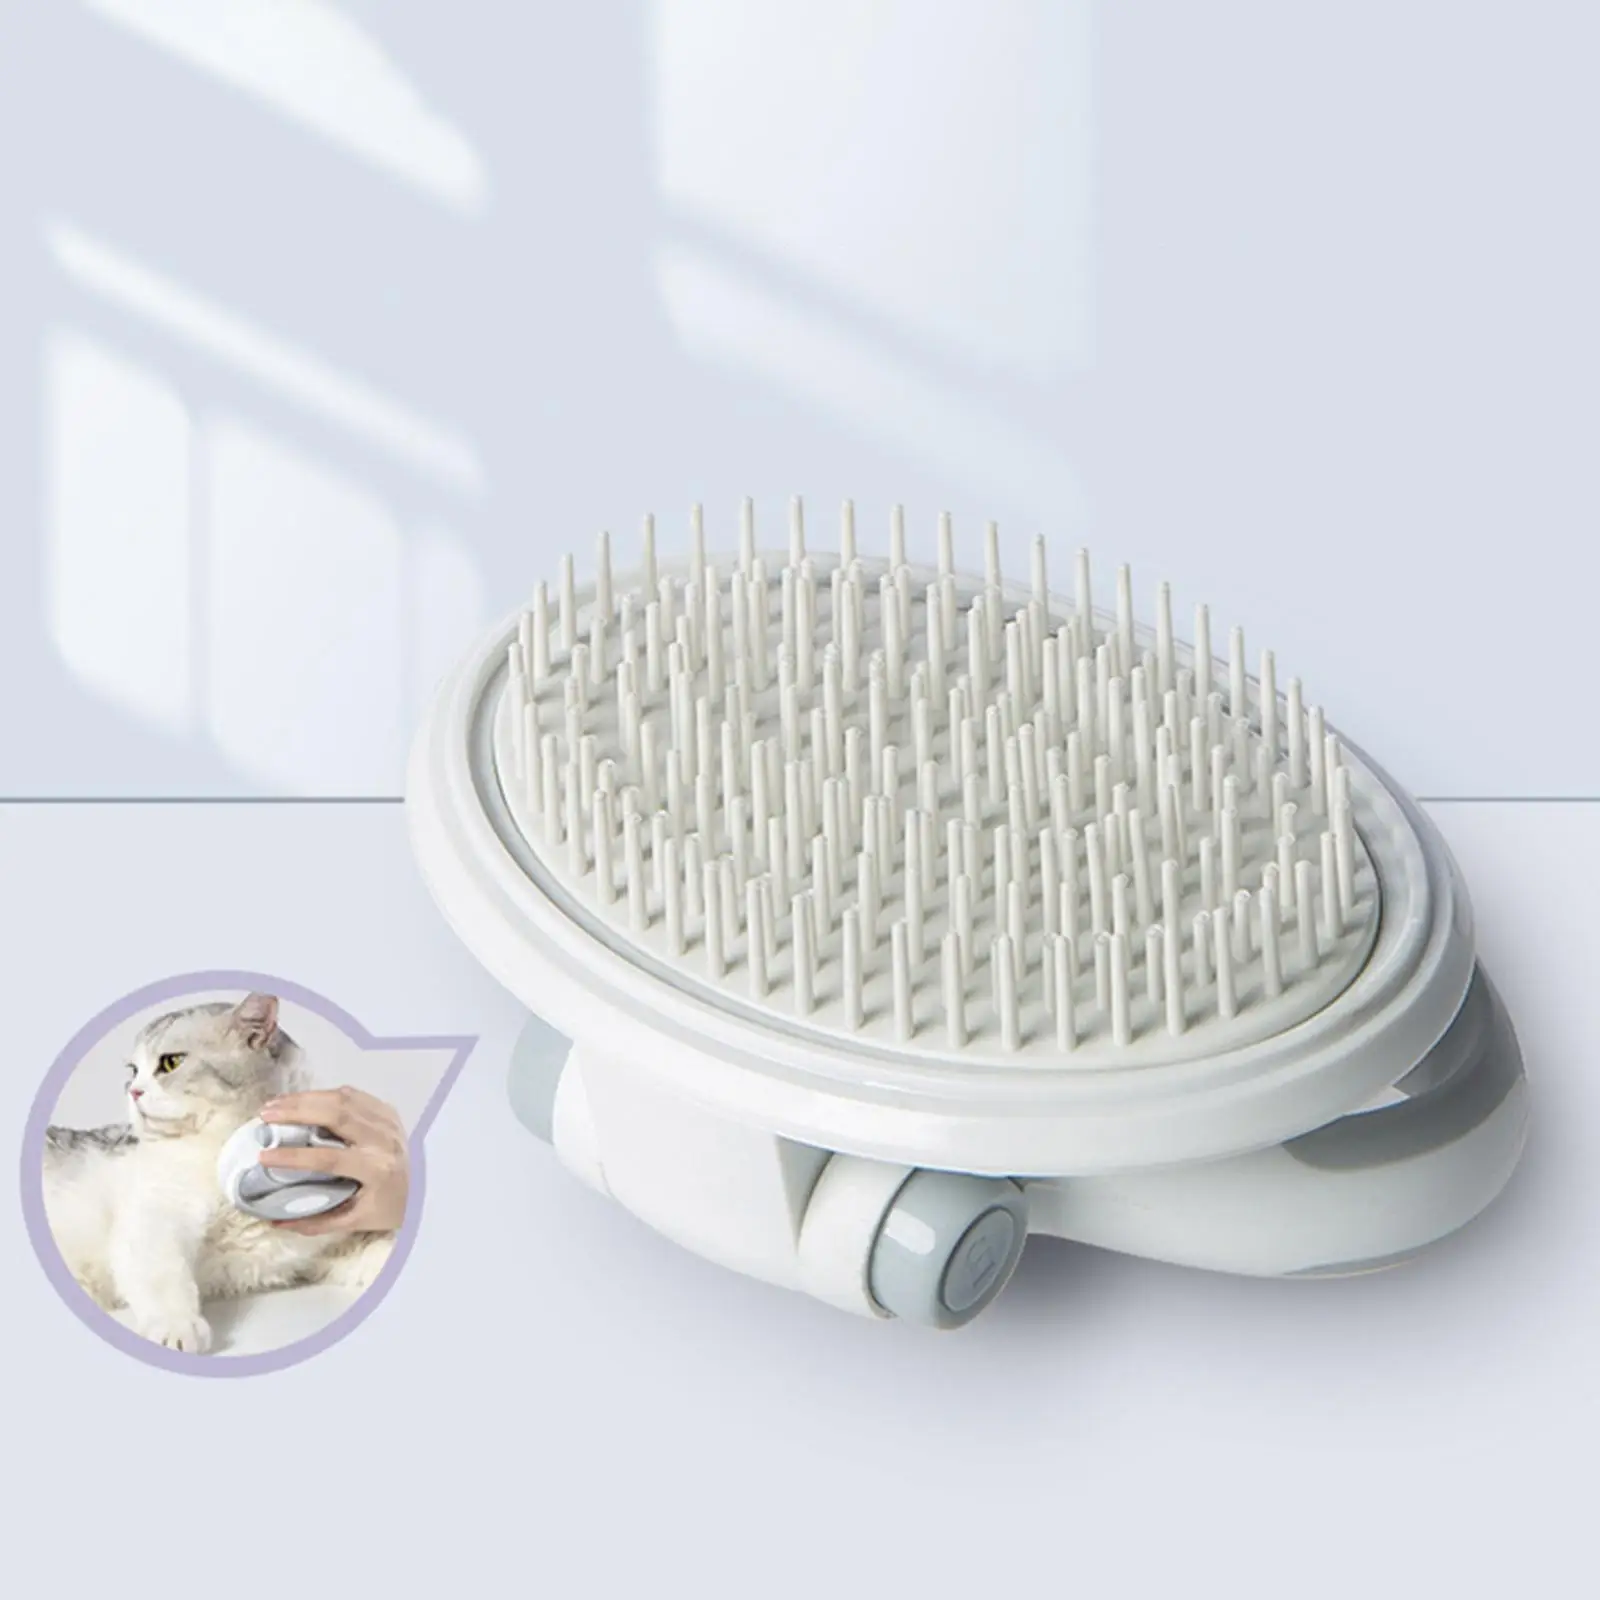 Cat Brush Grooming with Adjustable Handle Shedding Comb Removes Loose Underlayers for Tangled Hair Short or Long Hair Washing